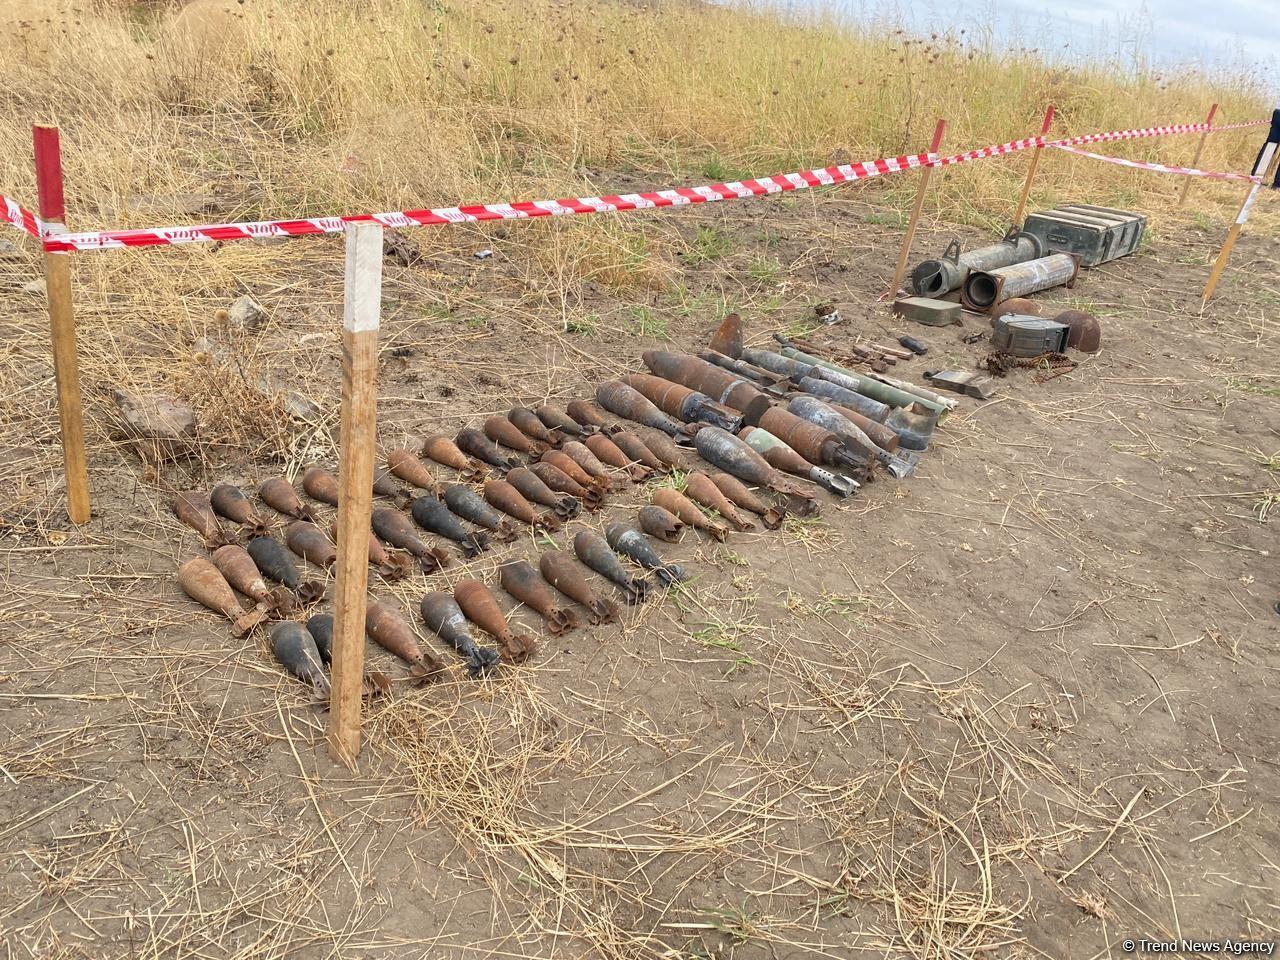 Azerbaijani mine agency defuses over 700 mines, munitions in liberated lands